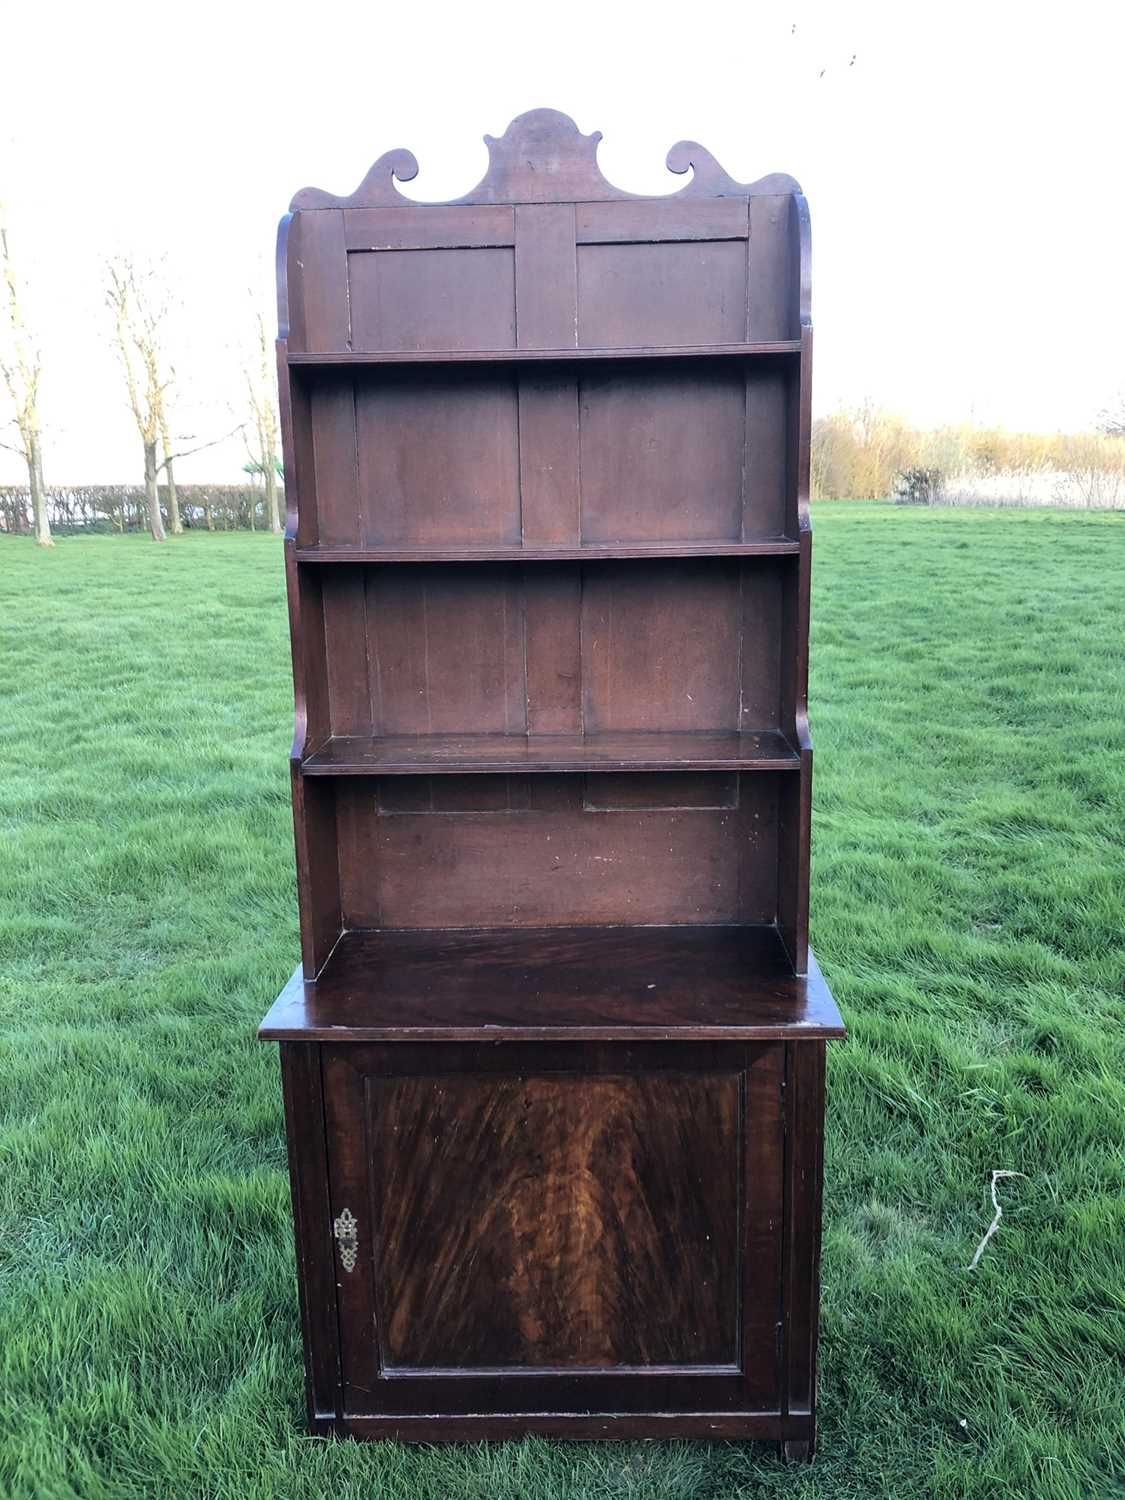 Lot 96 - 19th century mahogany and grained waterfall bookcase with scrolling top rail and graduated open shelves, enclosed panel cupboard below, on tapering legs, 78cm wide x 38cm deep x 190cm high